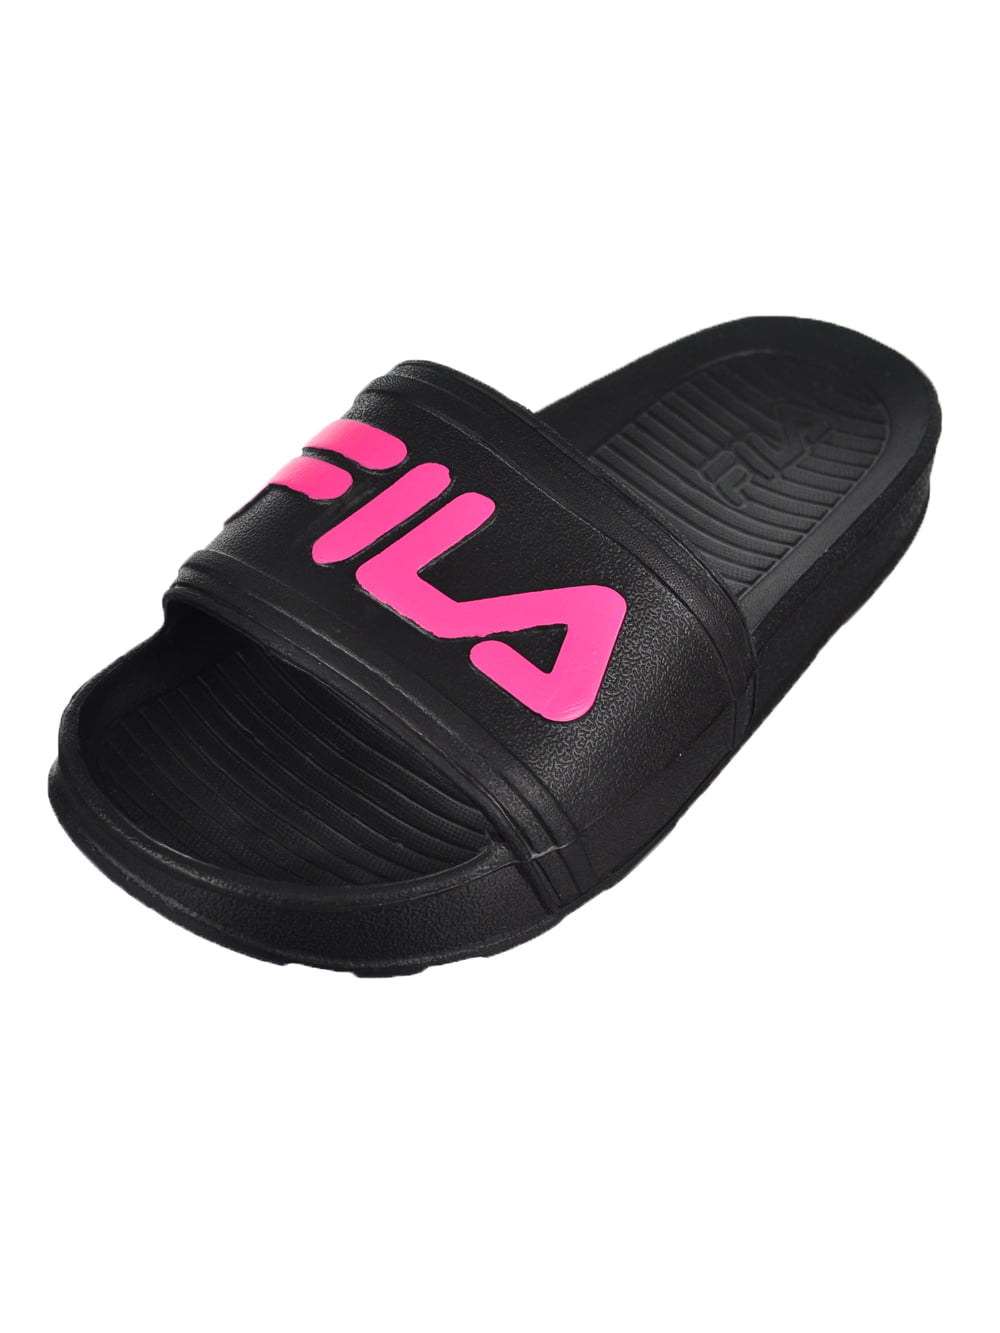 youth slides shoes